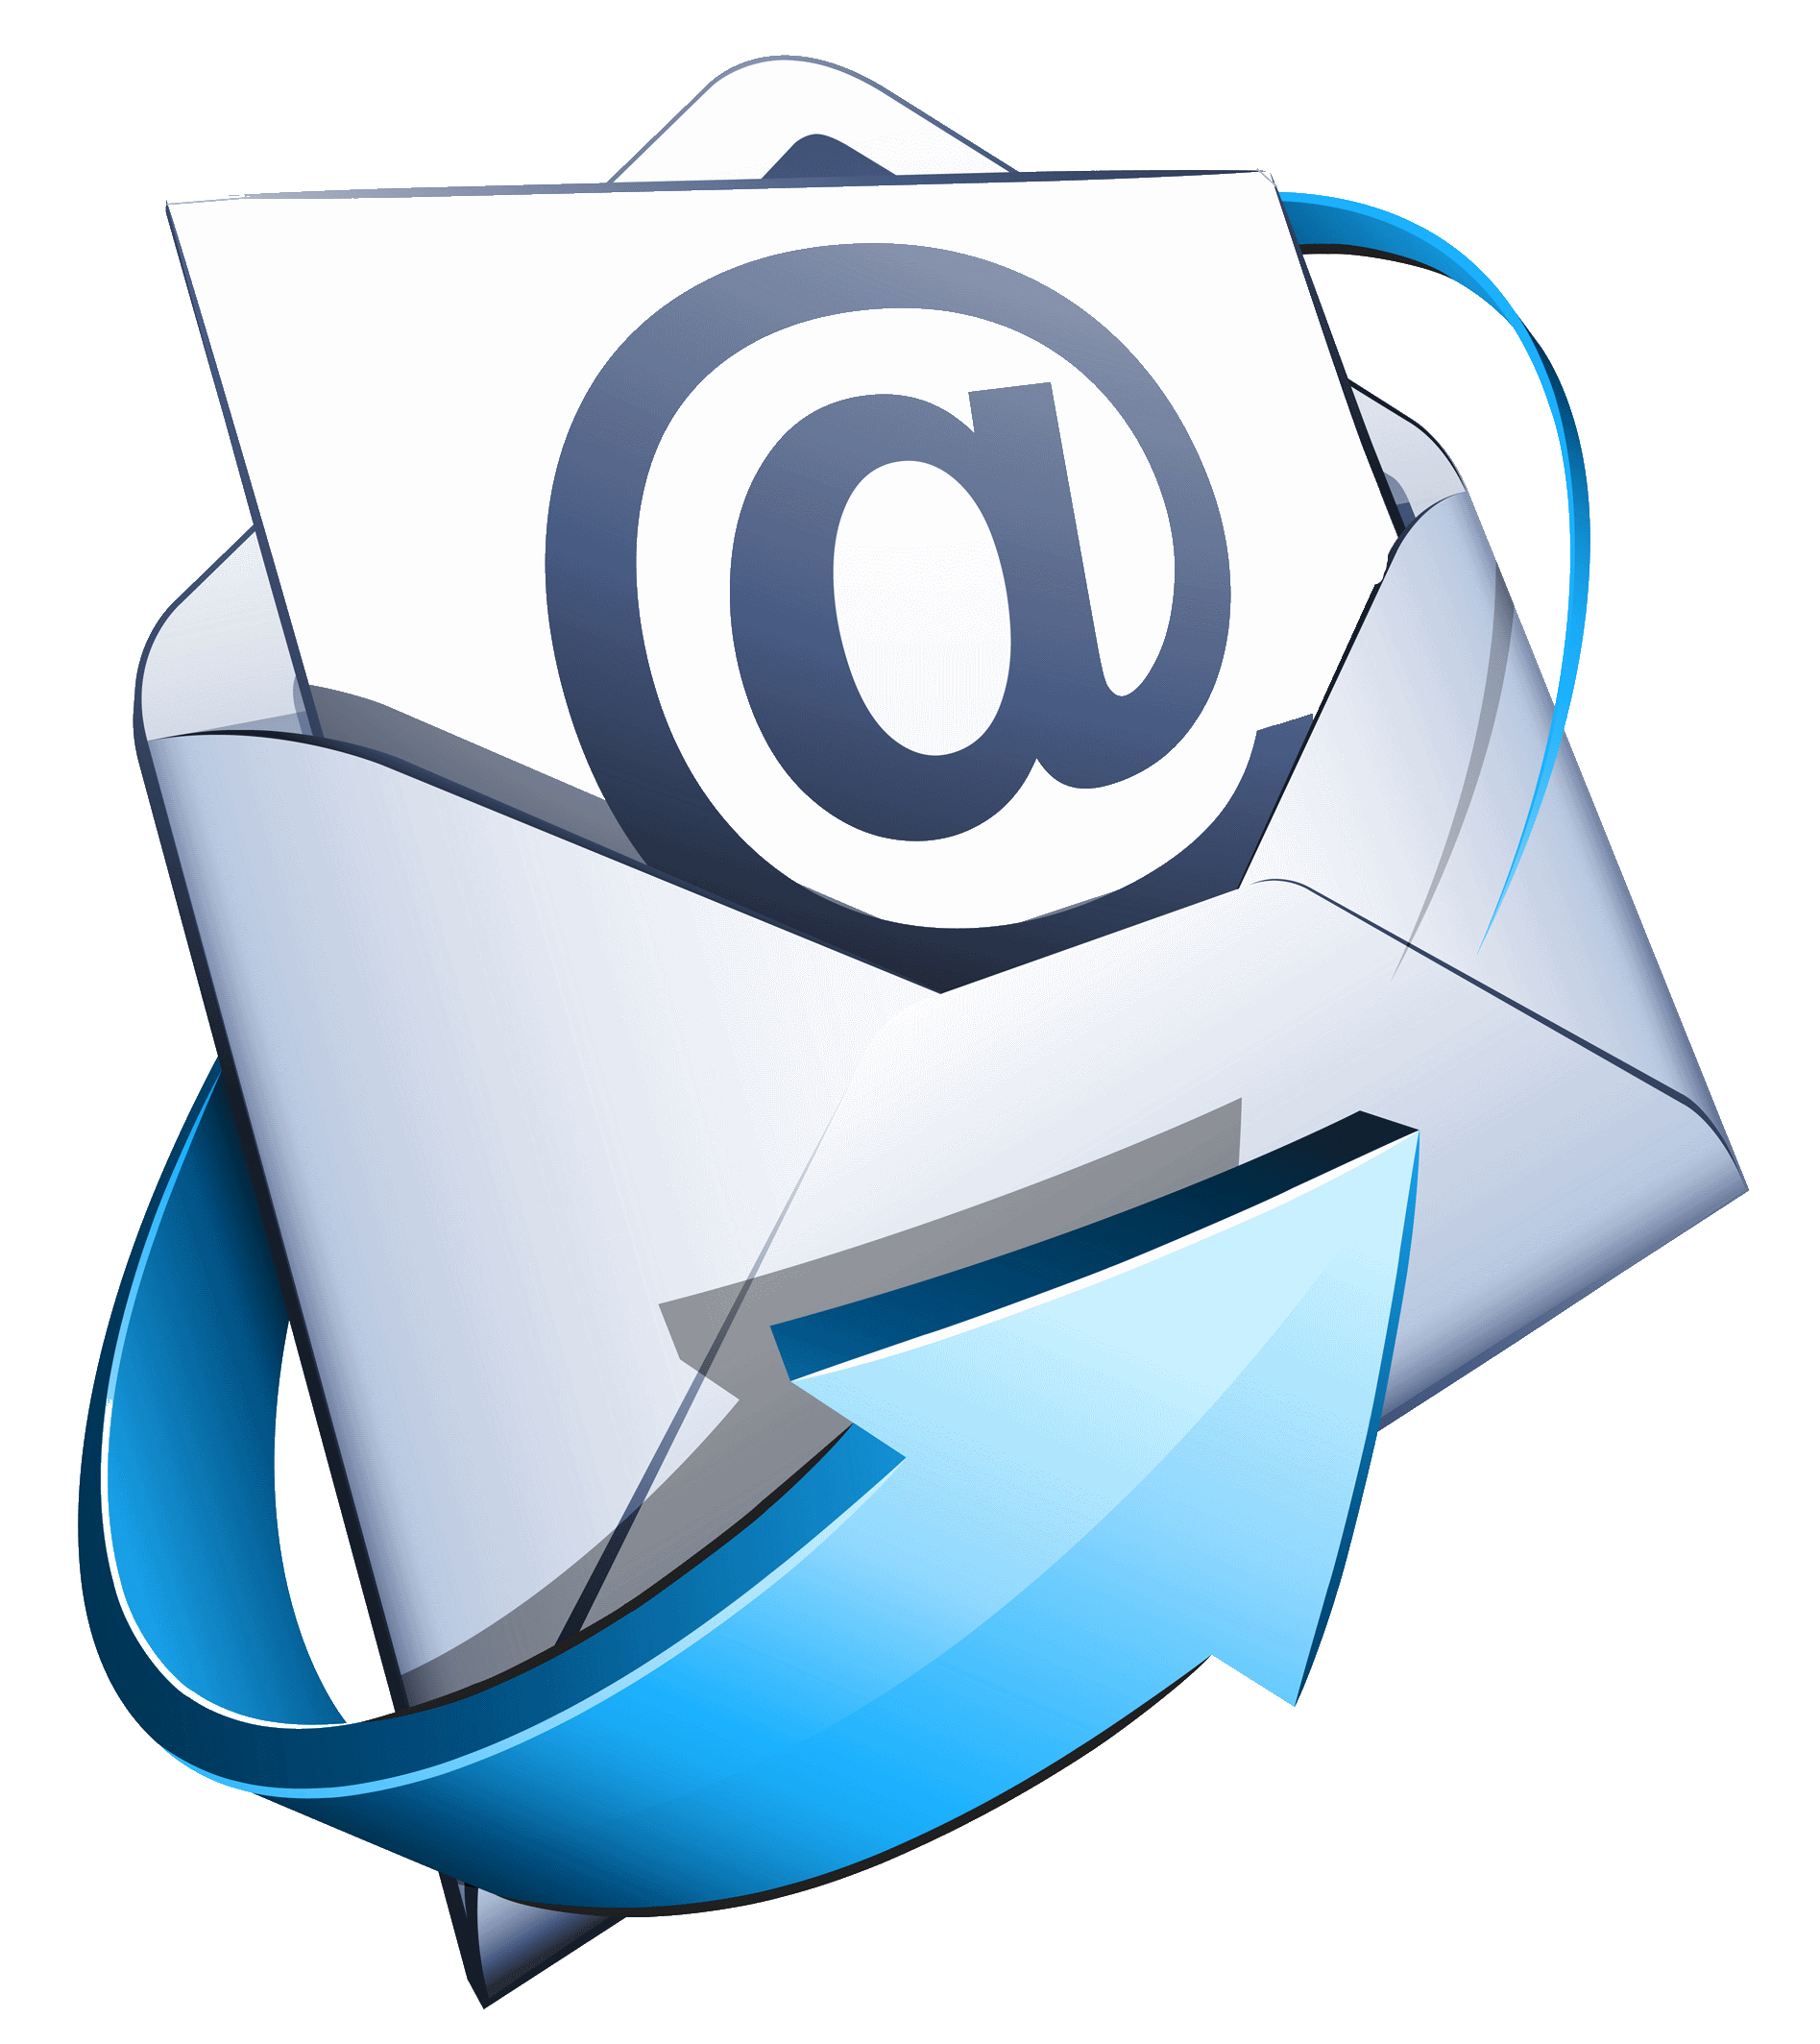 email icon clipart - photo #45